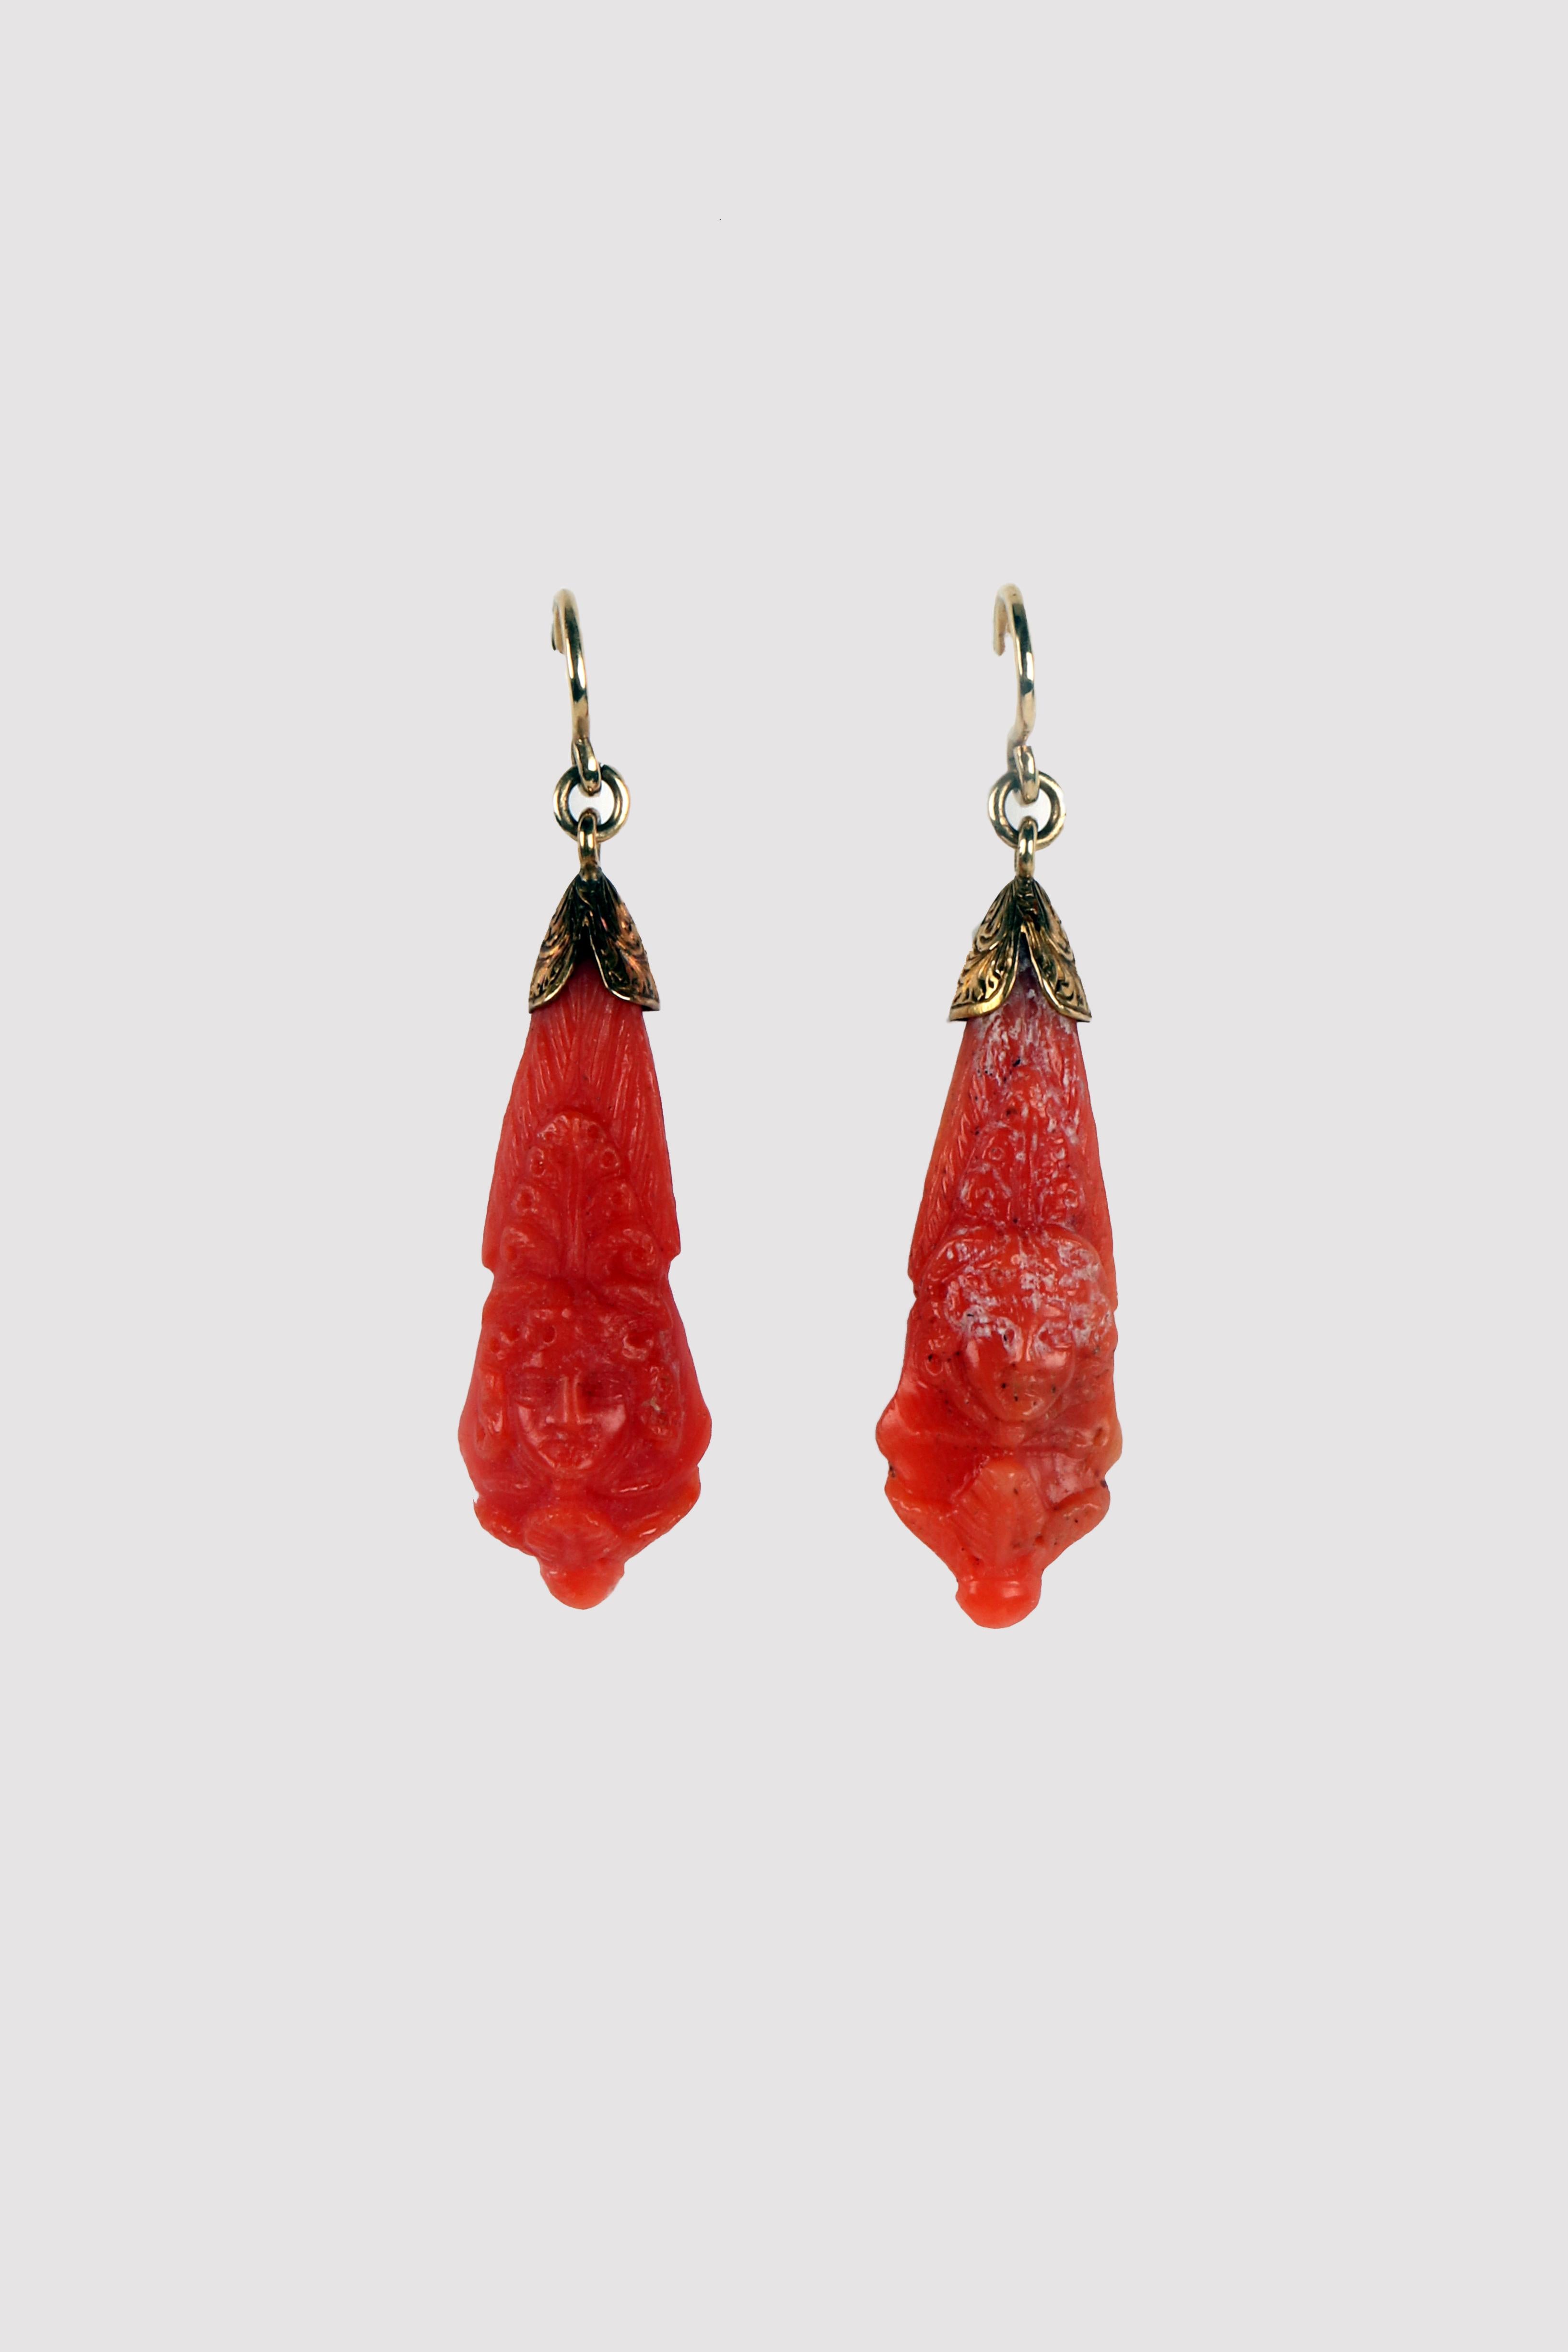 Victorian earrings in gold and coral. A smooth shank gold hook supports a connecting ring, to which the pendant is connected. Supported by a double chiselled gold leaf motif, the pendant is cut and engraved in Sciacca (Sicily) coral , forming an